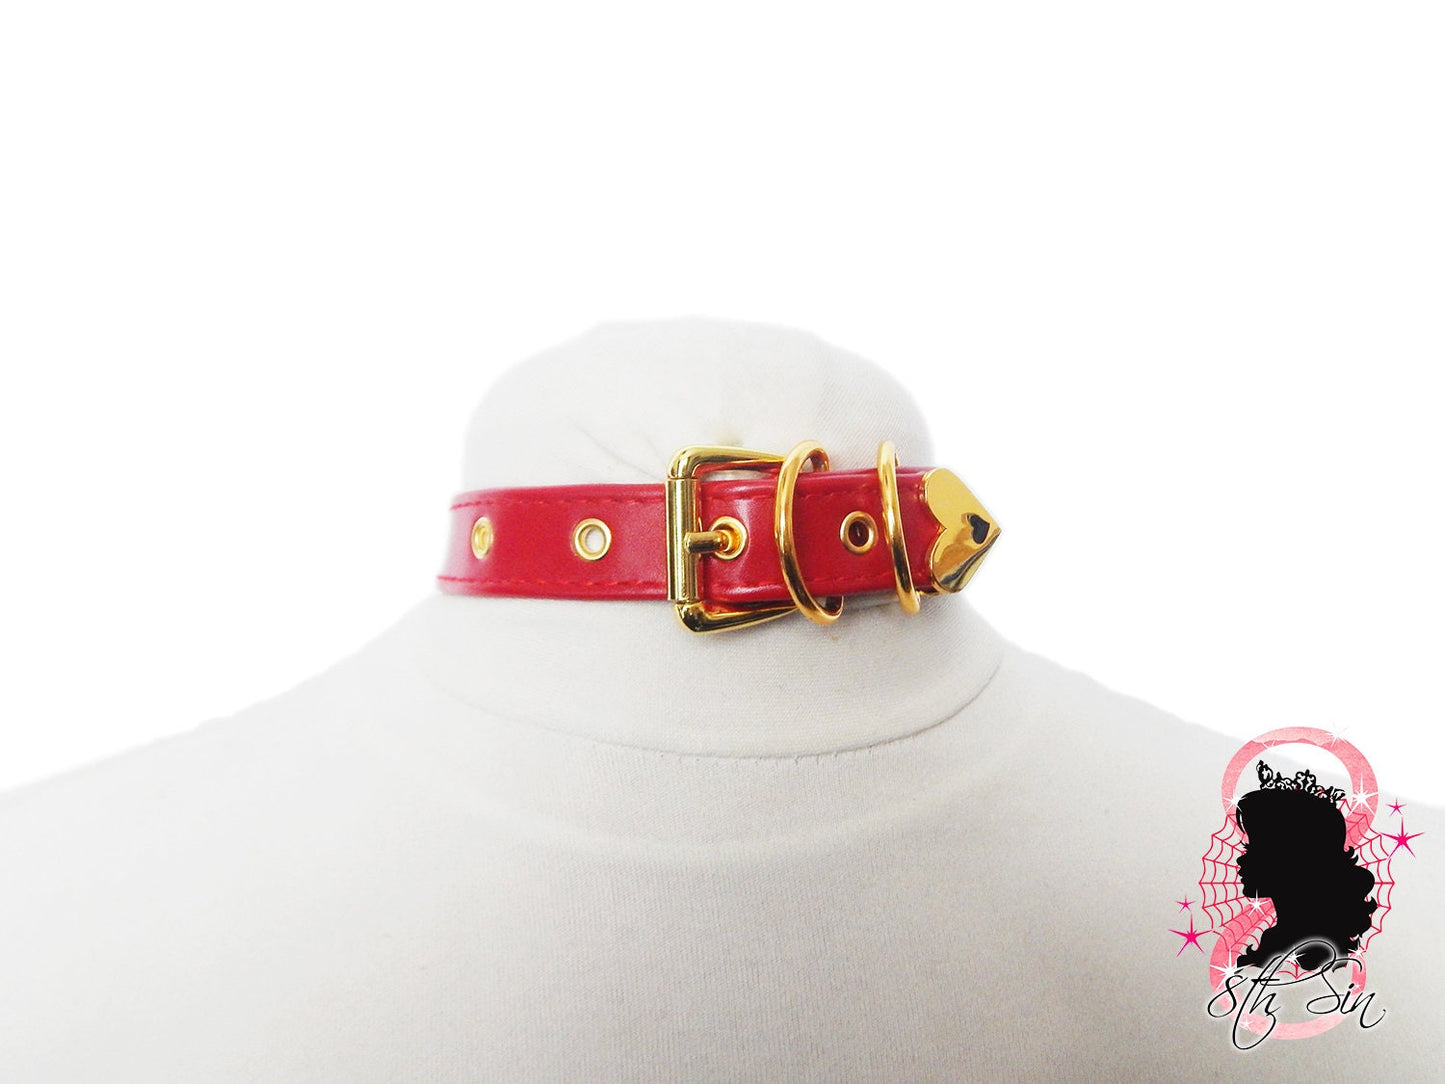 Red and Gold Heart Padlock Choker with Key